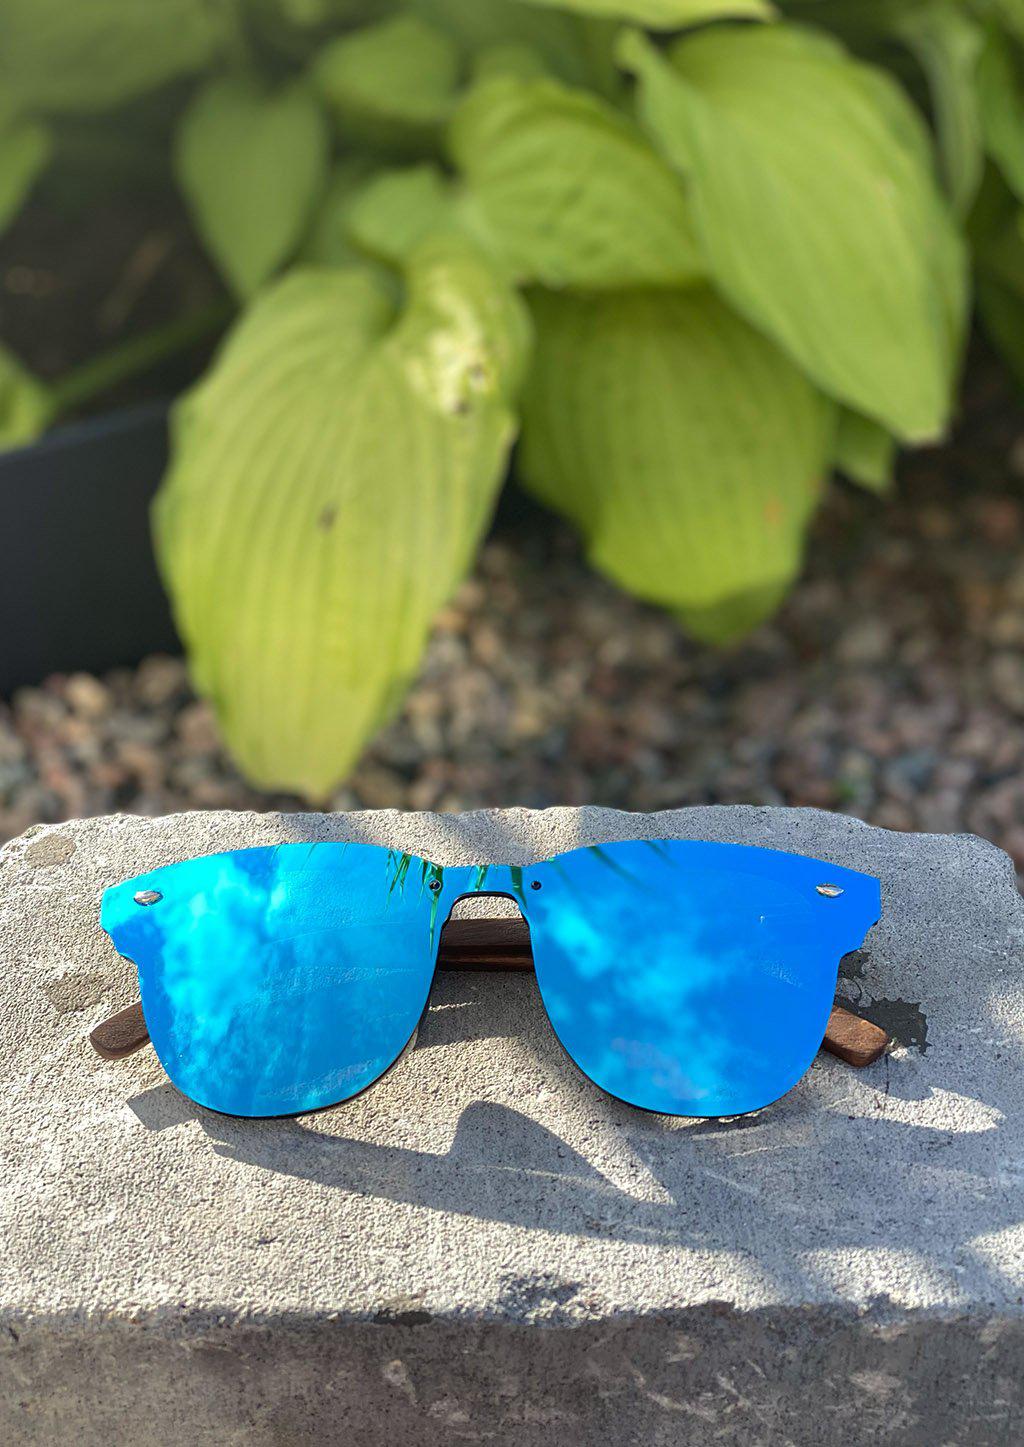 Eyewood tomorrow is our modern cool take on classic models. This is Delphinus with blue mirror lenses. With walnut wooden sides. Photo taken outside in the Swedish summer showing the nice blue mirror lenses.